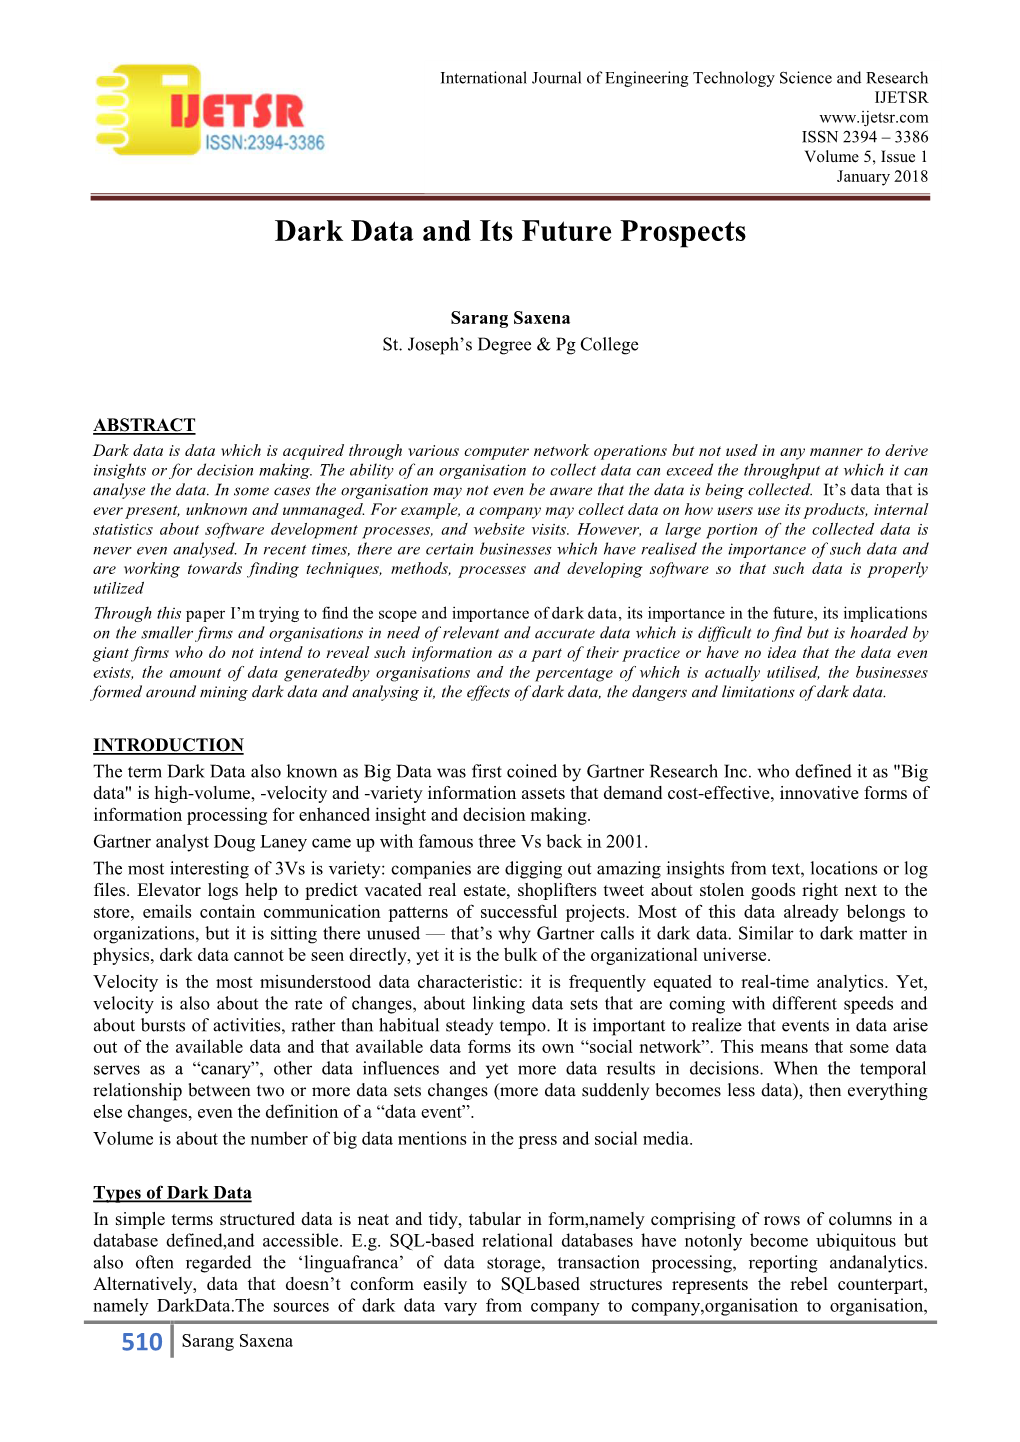 Dark Data and Its Future Prospects